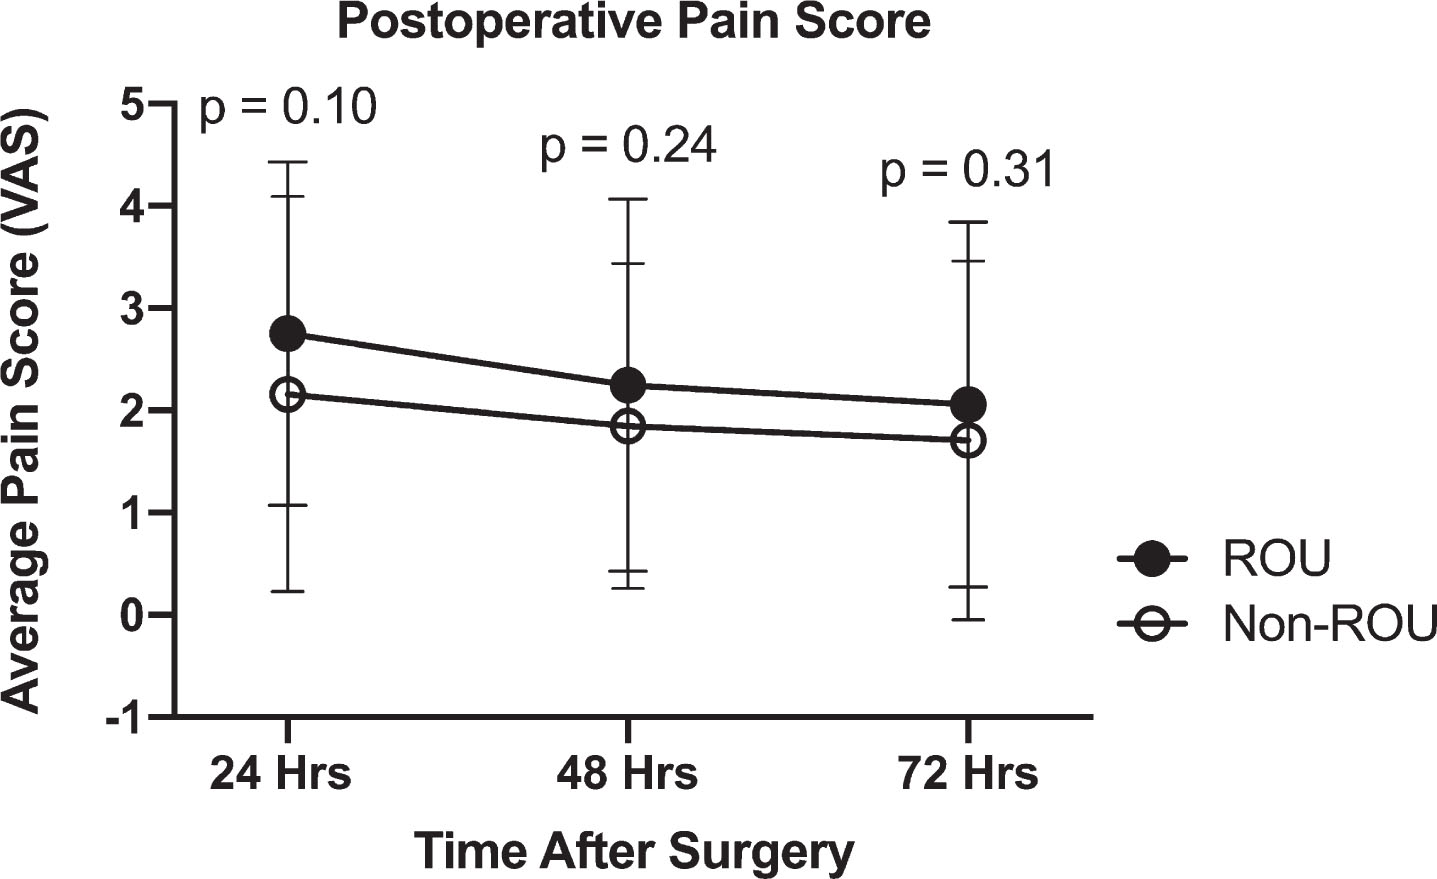 Comparison of average pain scores measured using the visual analogue scale. Measure of central tendency are reported as mean ± SD. Analysis was performed using student’s t test. P < 0.05 was deemed statistically significant.